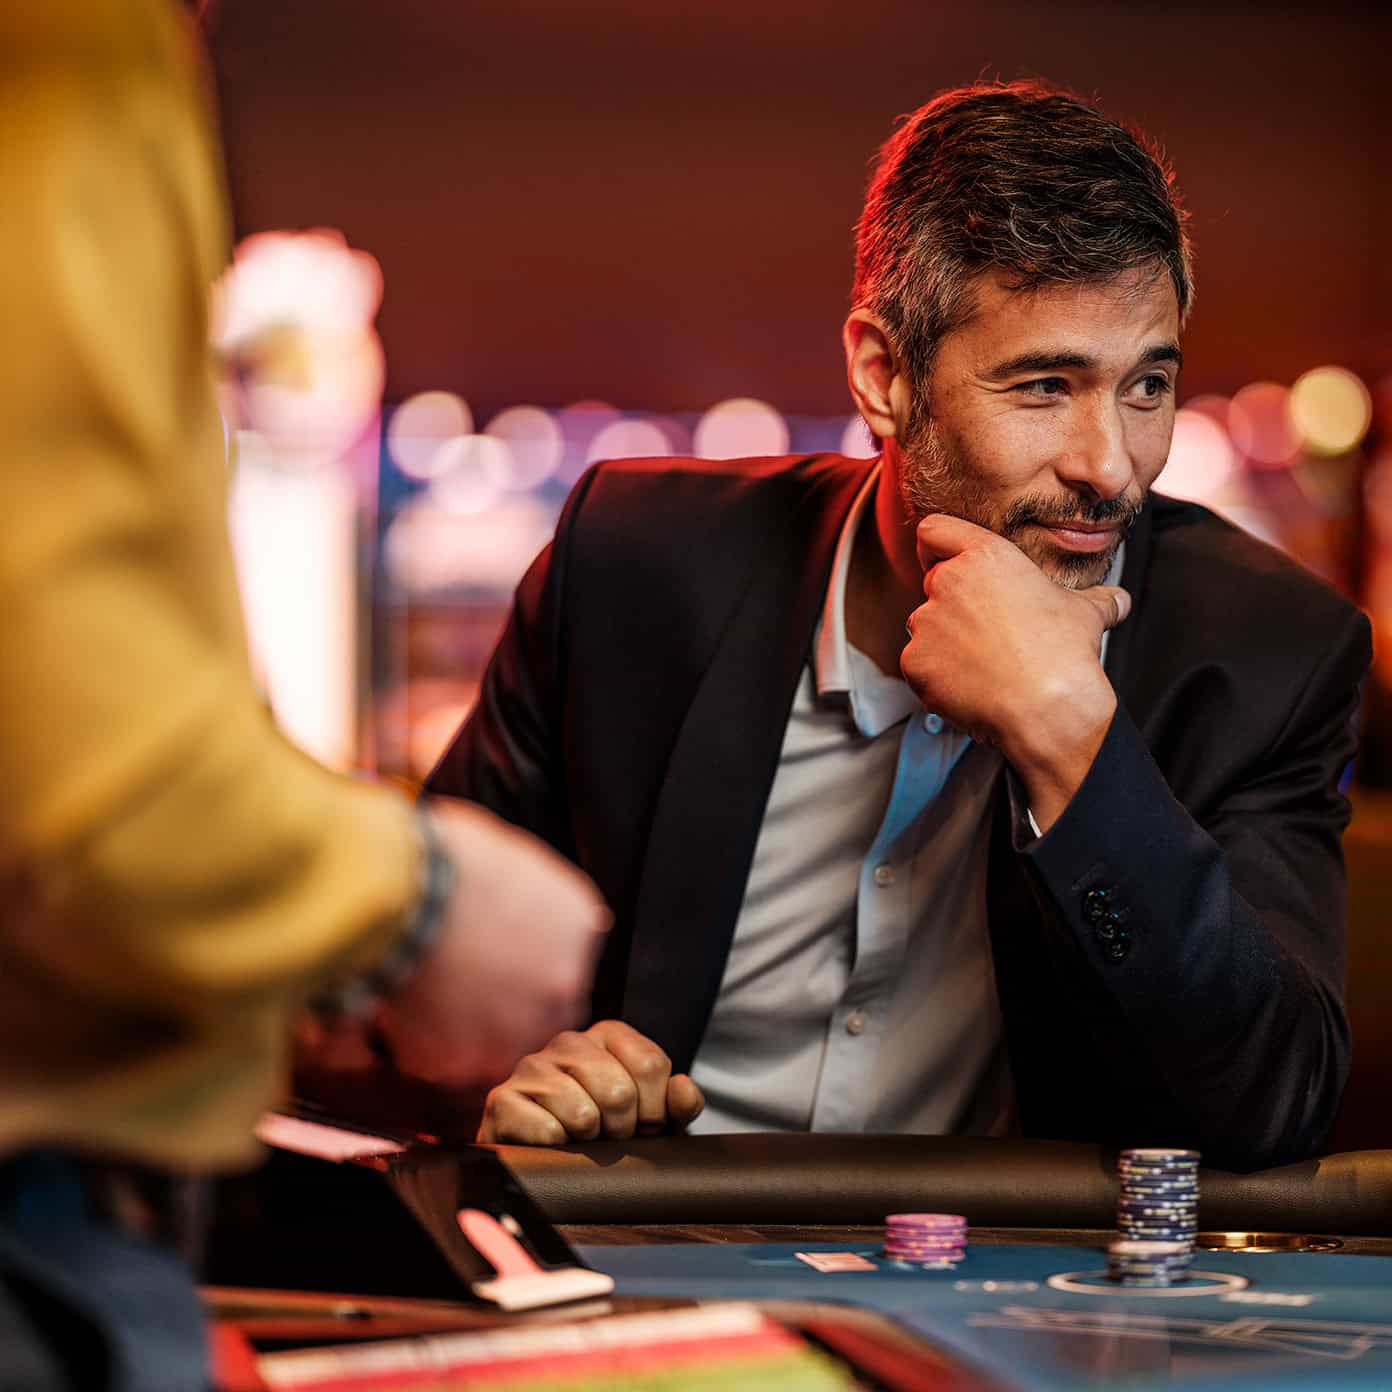 A man in a blazer sits pensively at a blackjack table.